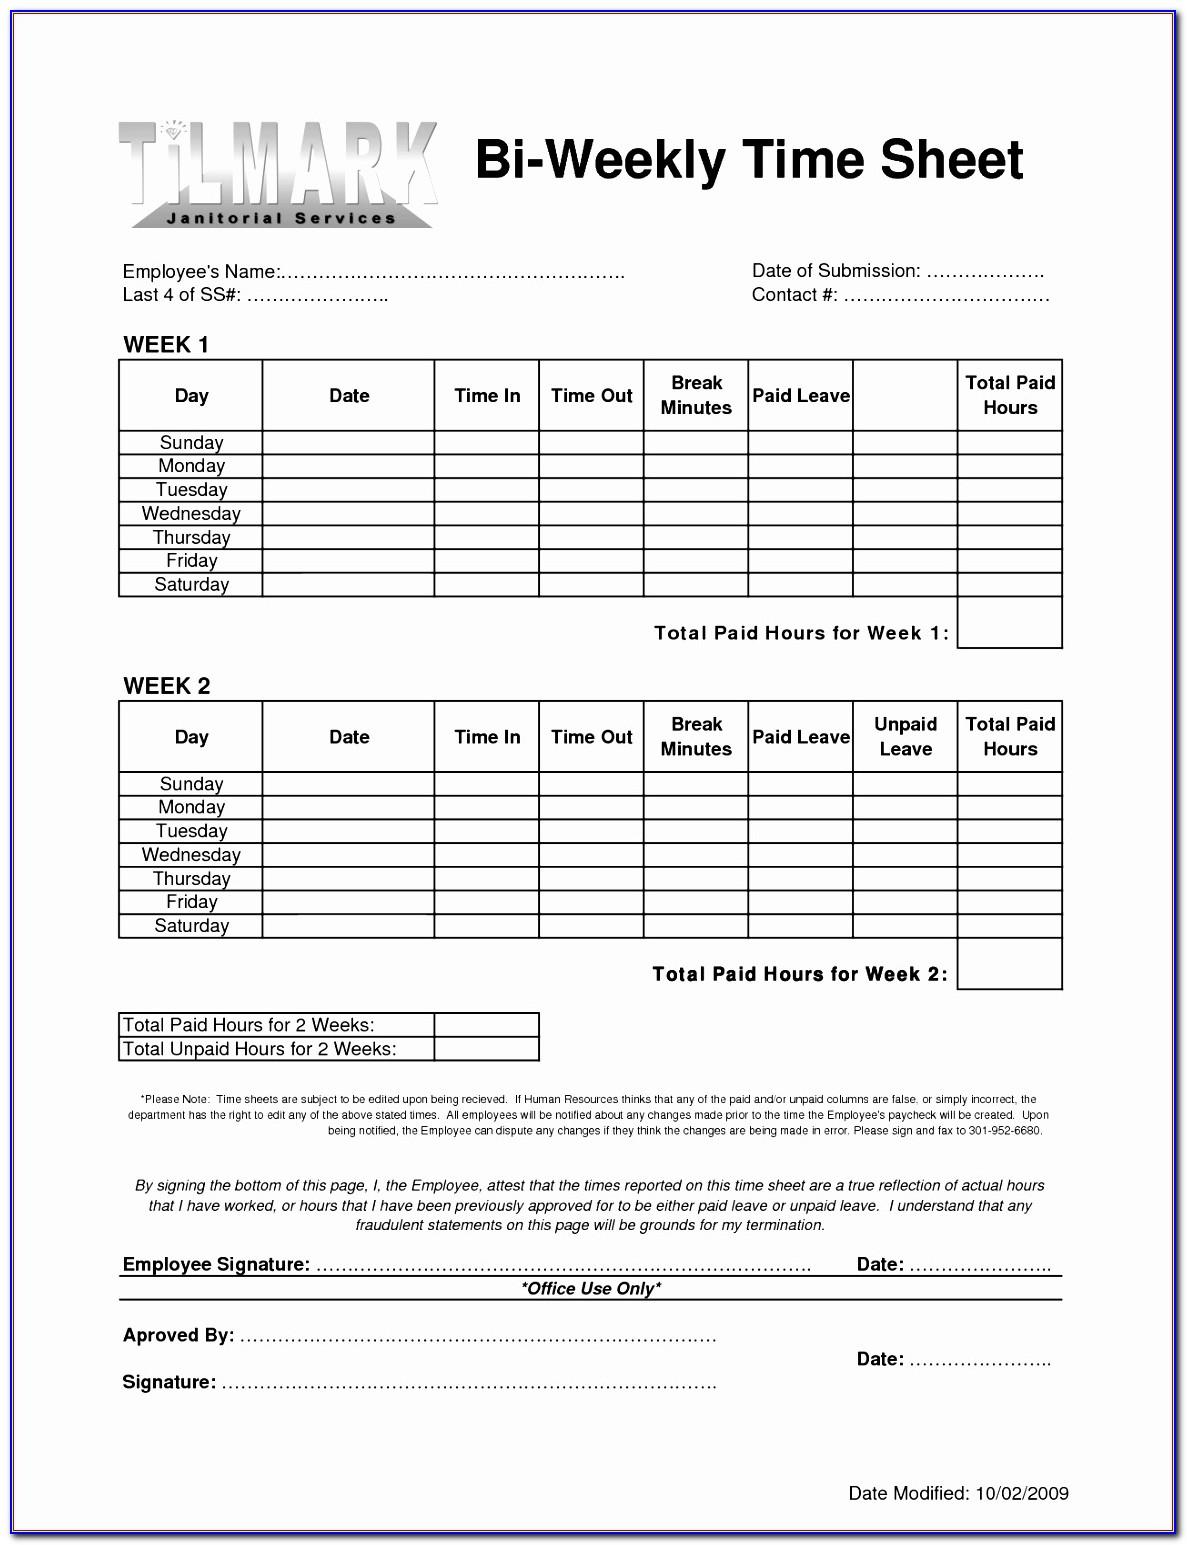 Equity Investment Term Sheet Template